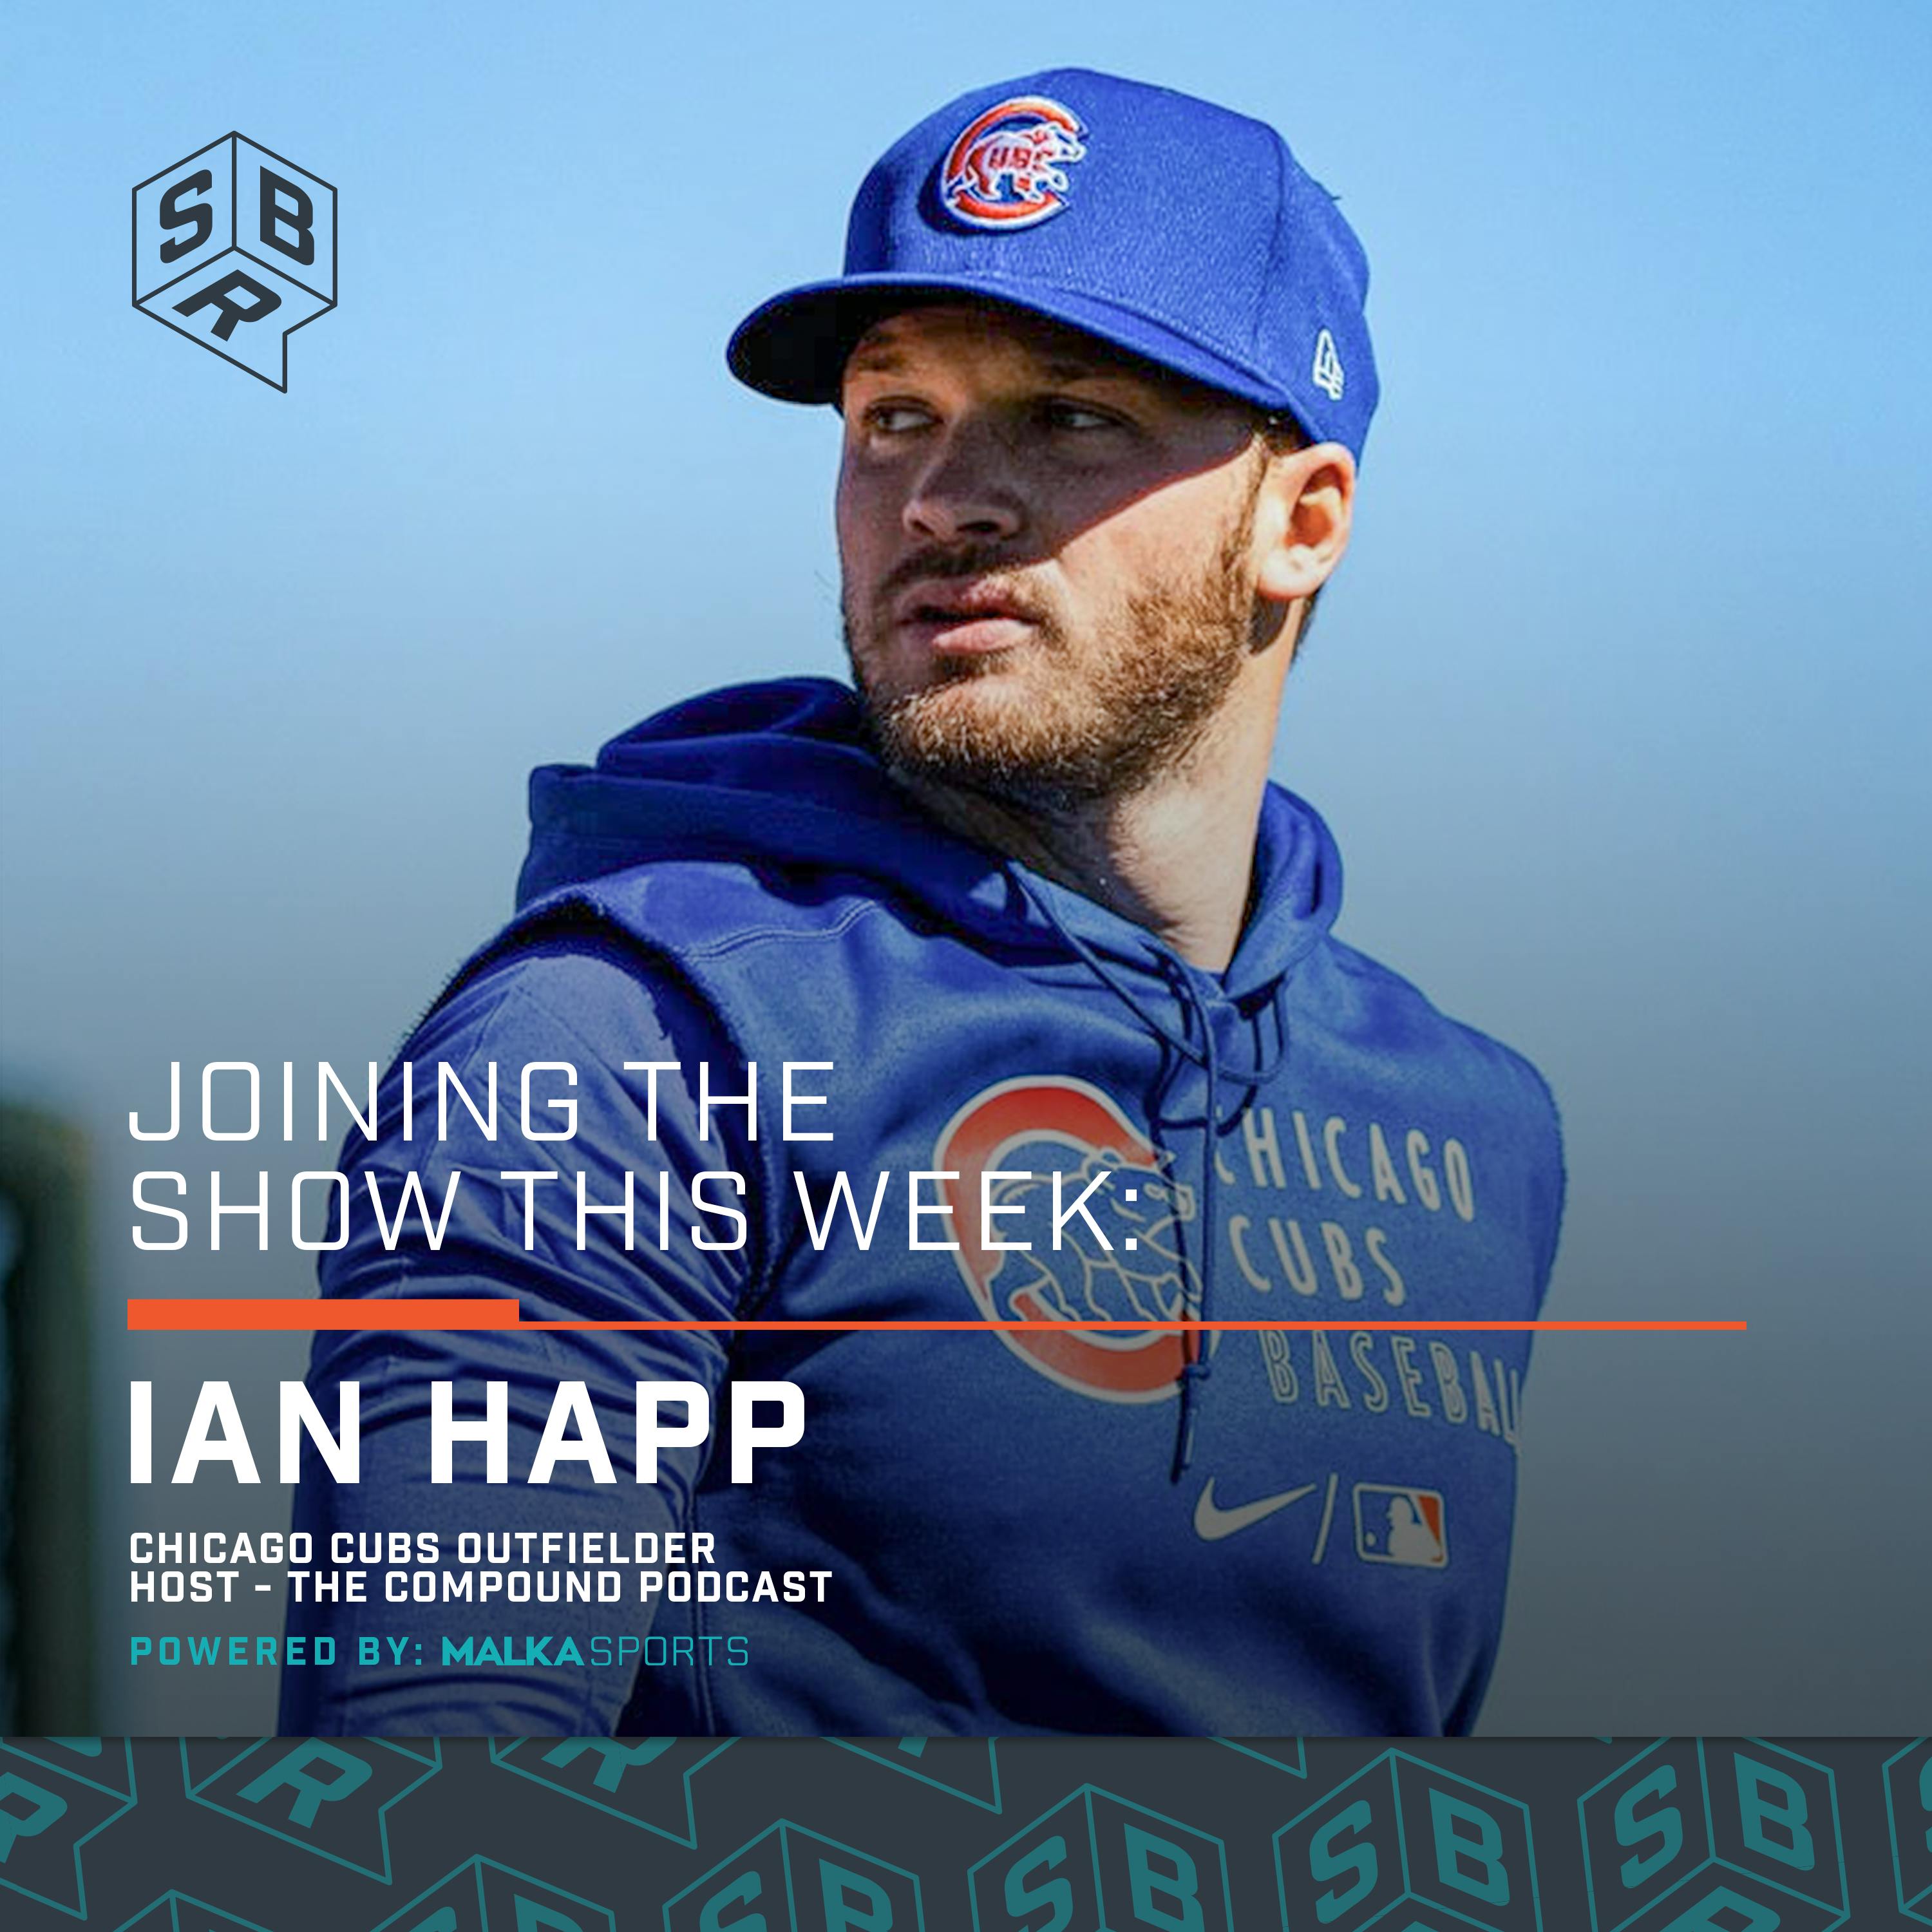 Ian Happ - Chicago Cubs Outfielder, Host of The Compound Podcast & Entrepreneur